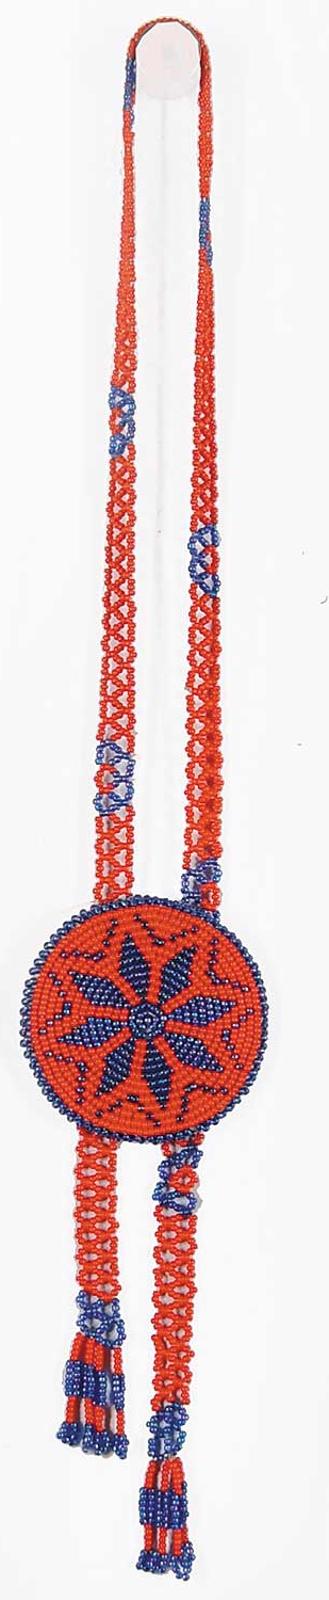 First Nations Basket School - Beaded Bolo Tie